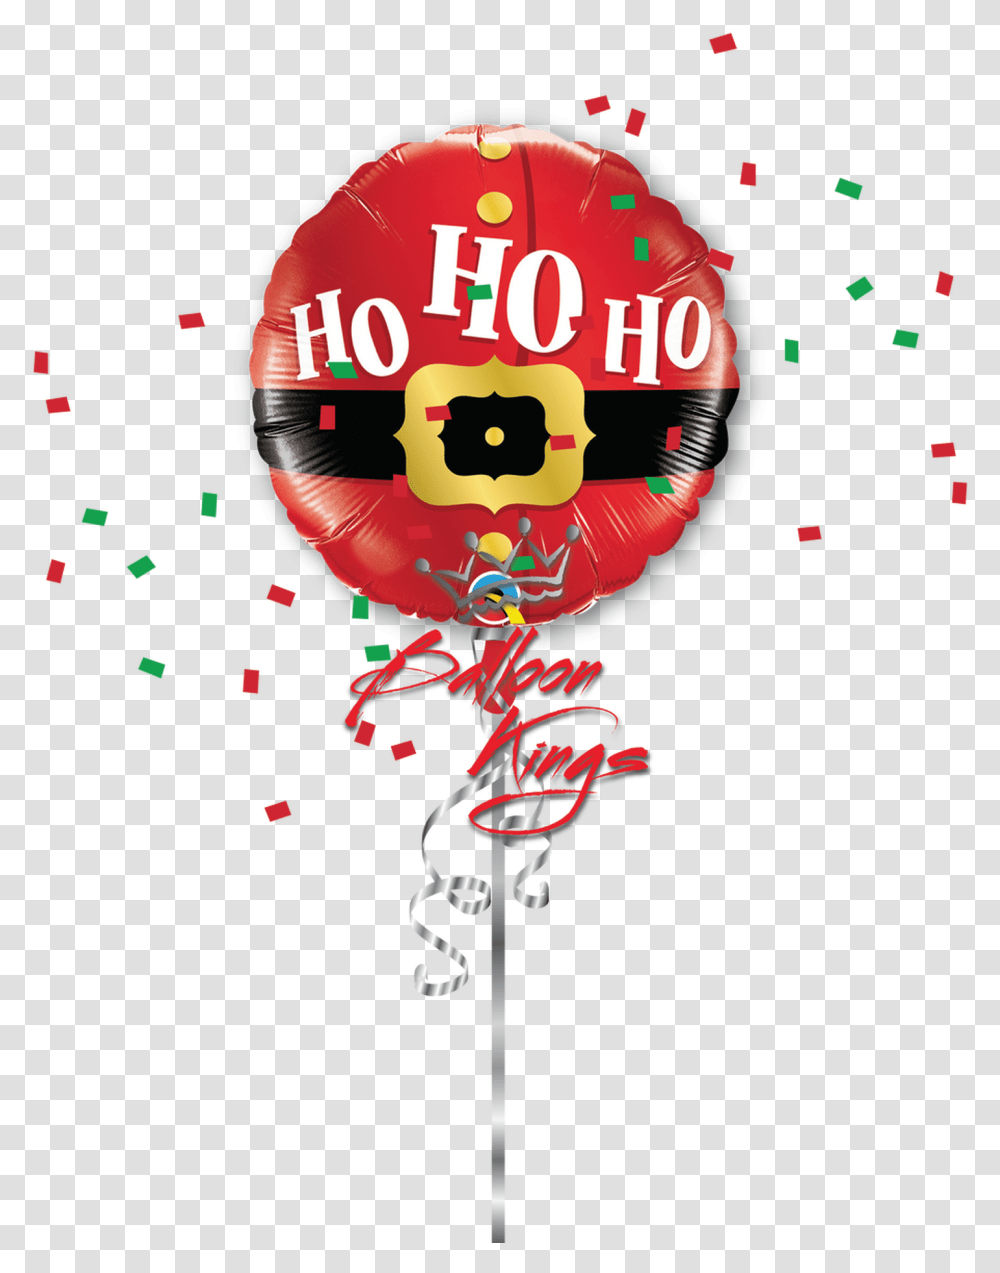 Ho Ho Ho Baby Boy Banners, Paper, Confetti Transparent Png